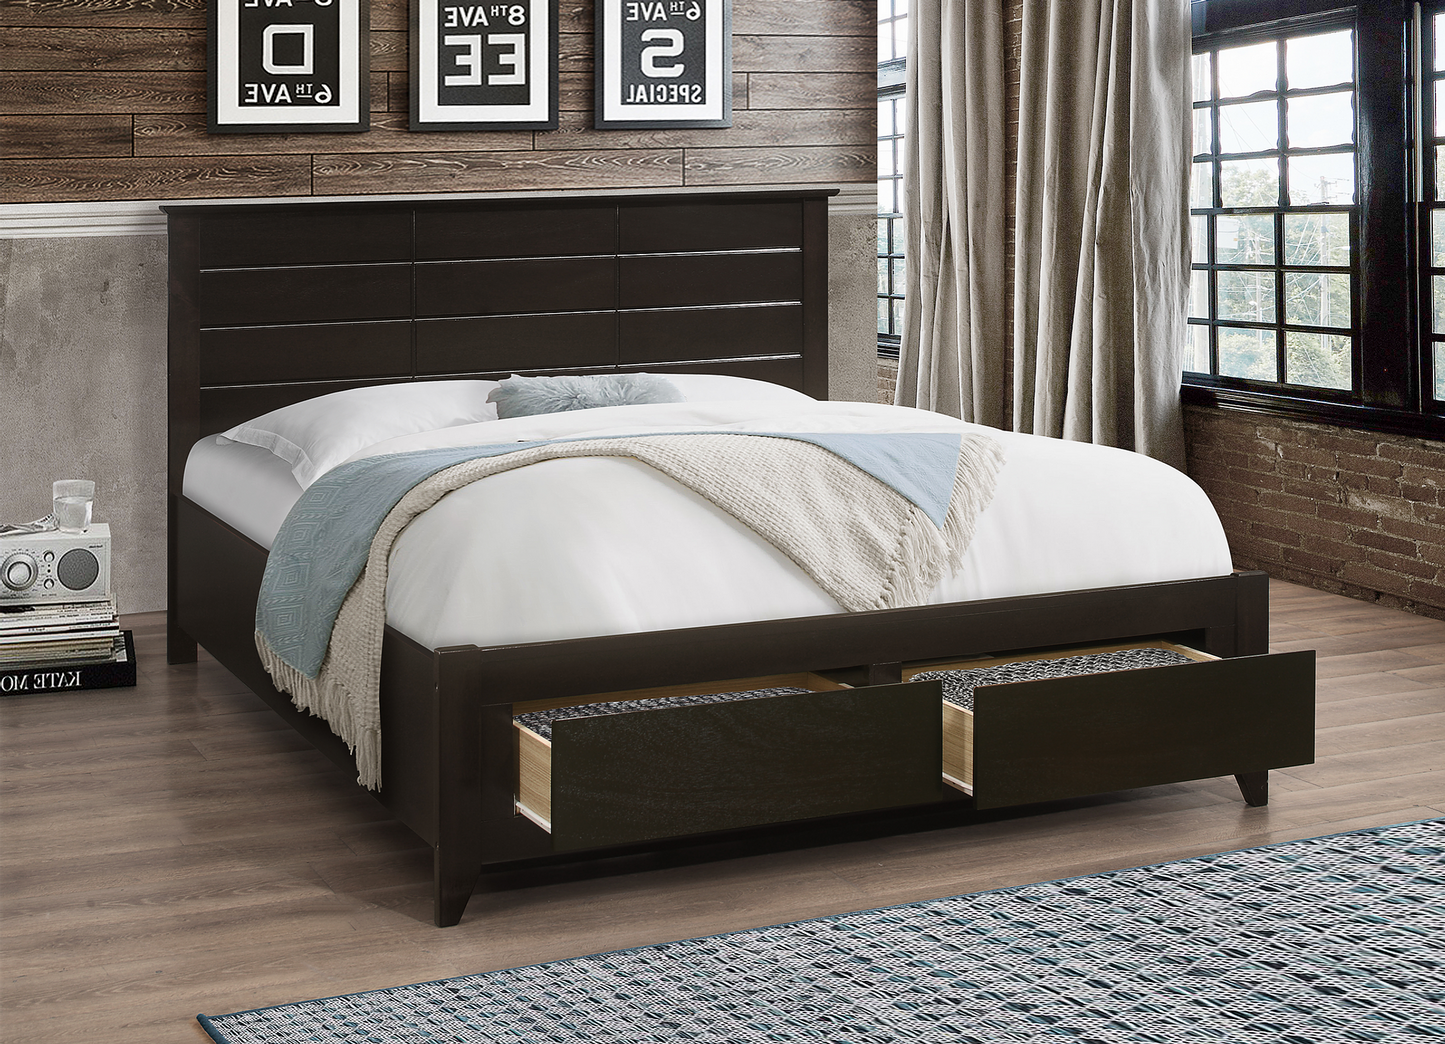 QUEEN SIZE- (421 ESPRESSO)- WOOD- BED FRAME- WITH DRAWERS